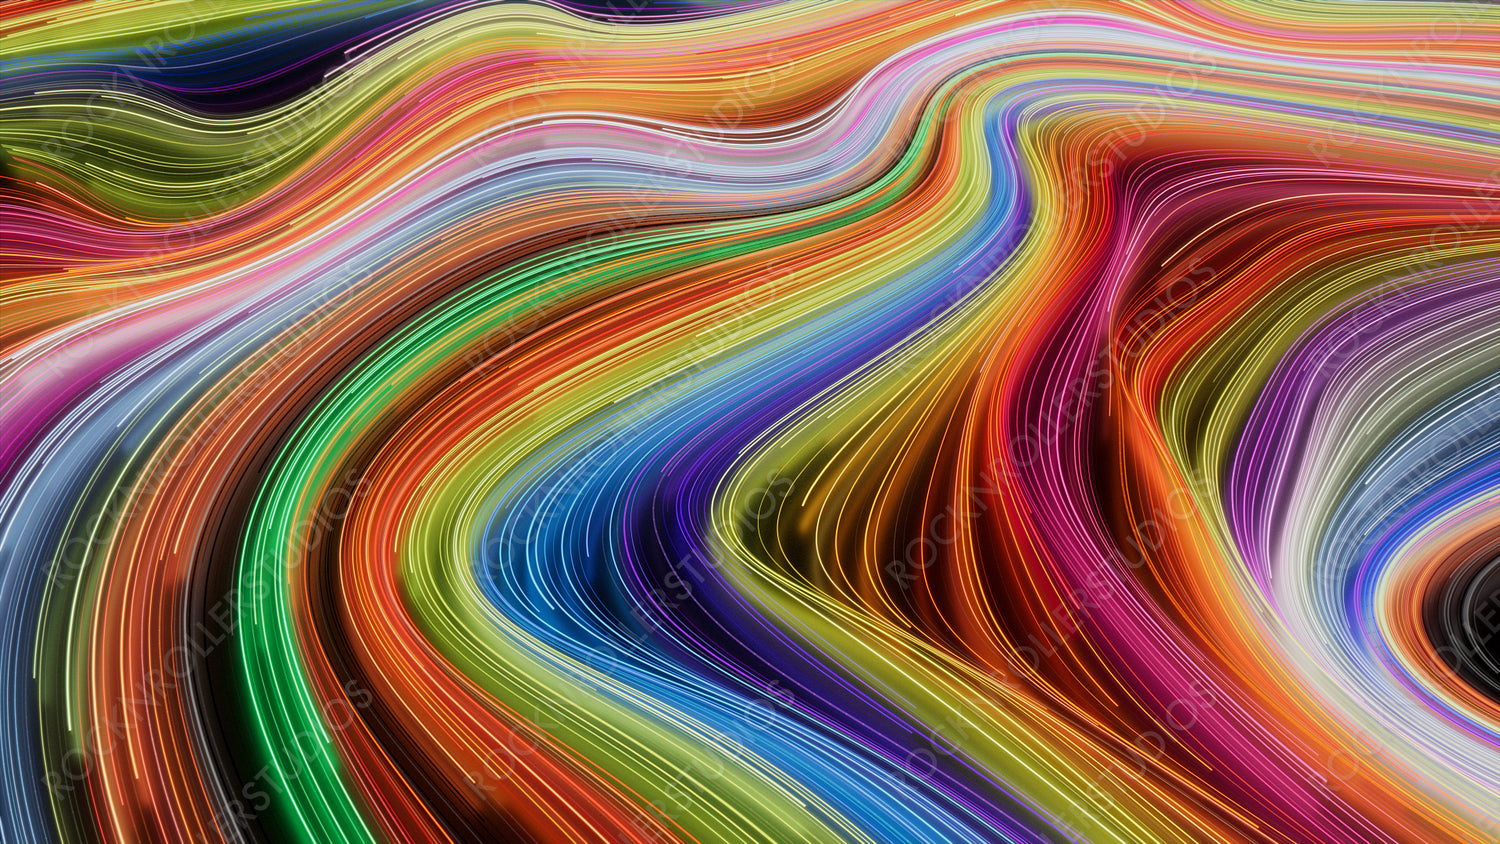 Wavy Swoosh Background with Orange, Pink and Green Stripes. 3D Render.